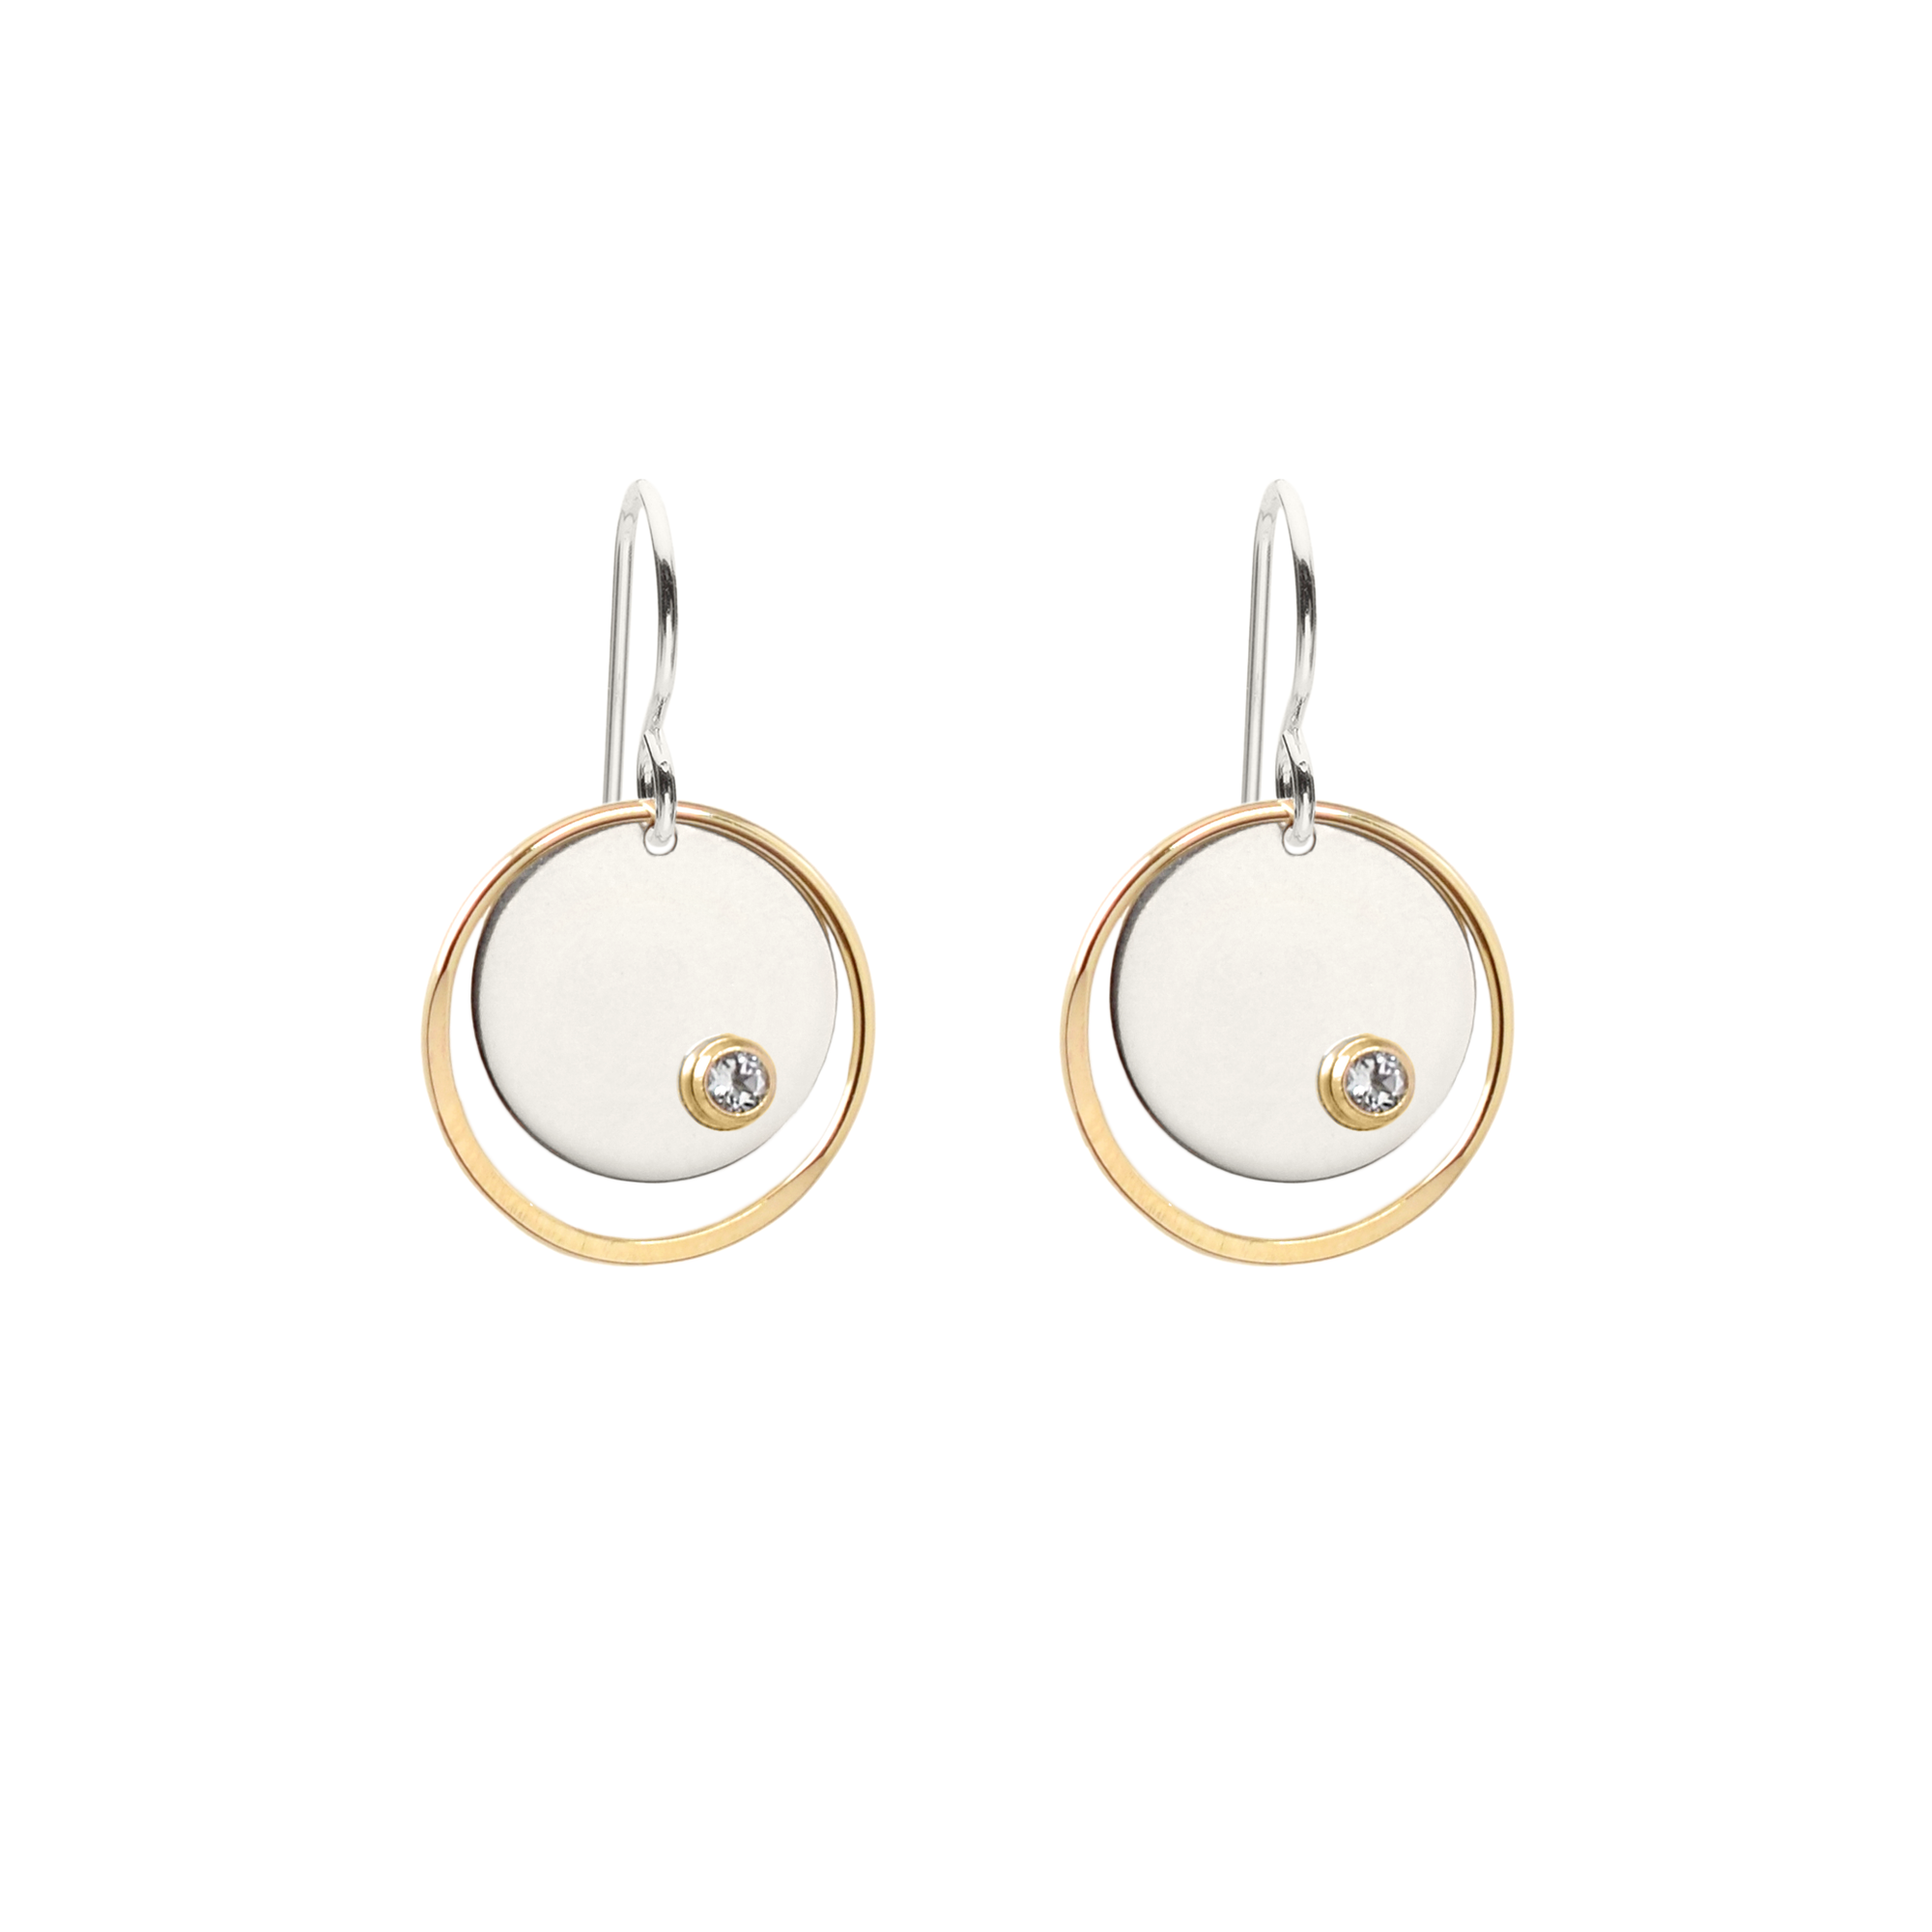 Celena Medium Silver Disc & Gold Circle Earrings with Gemstones